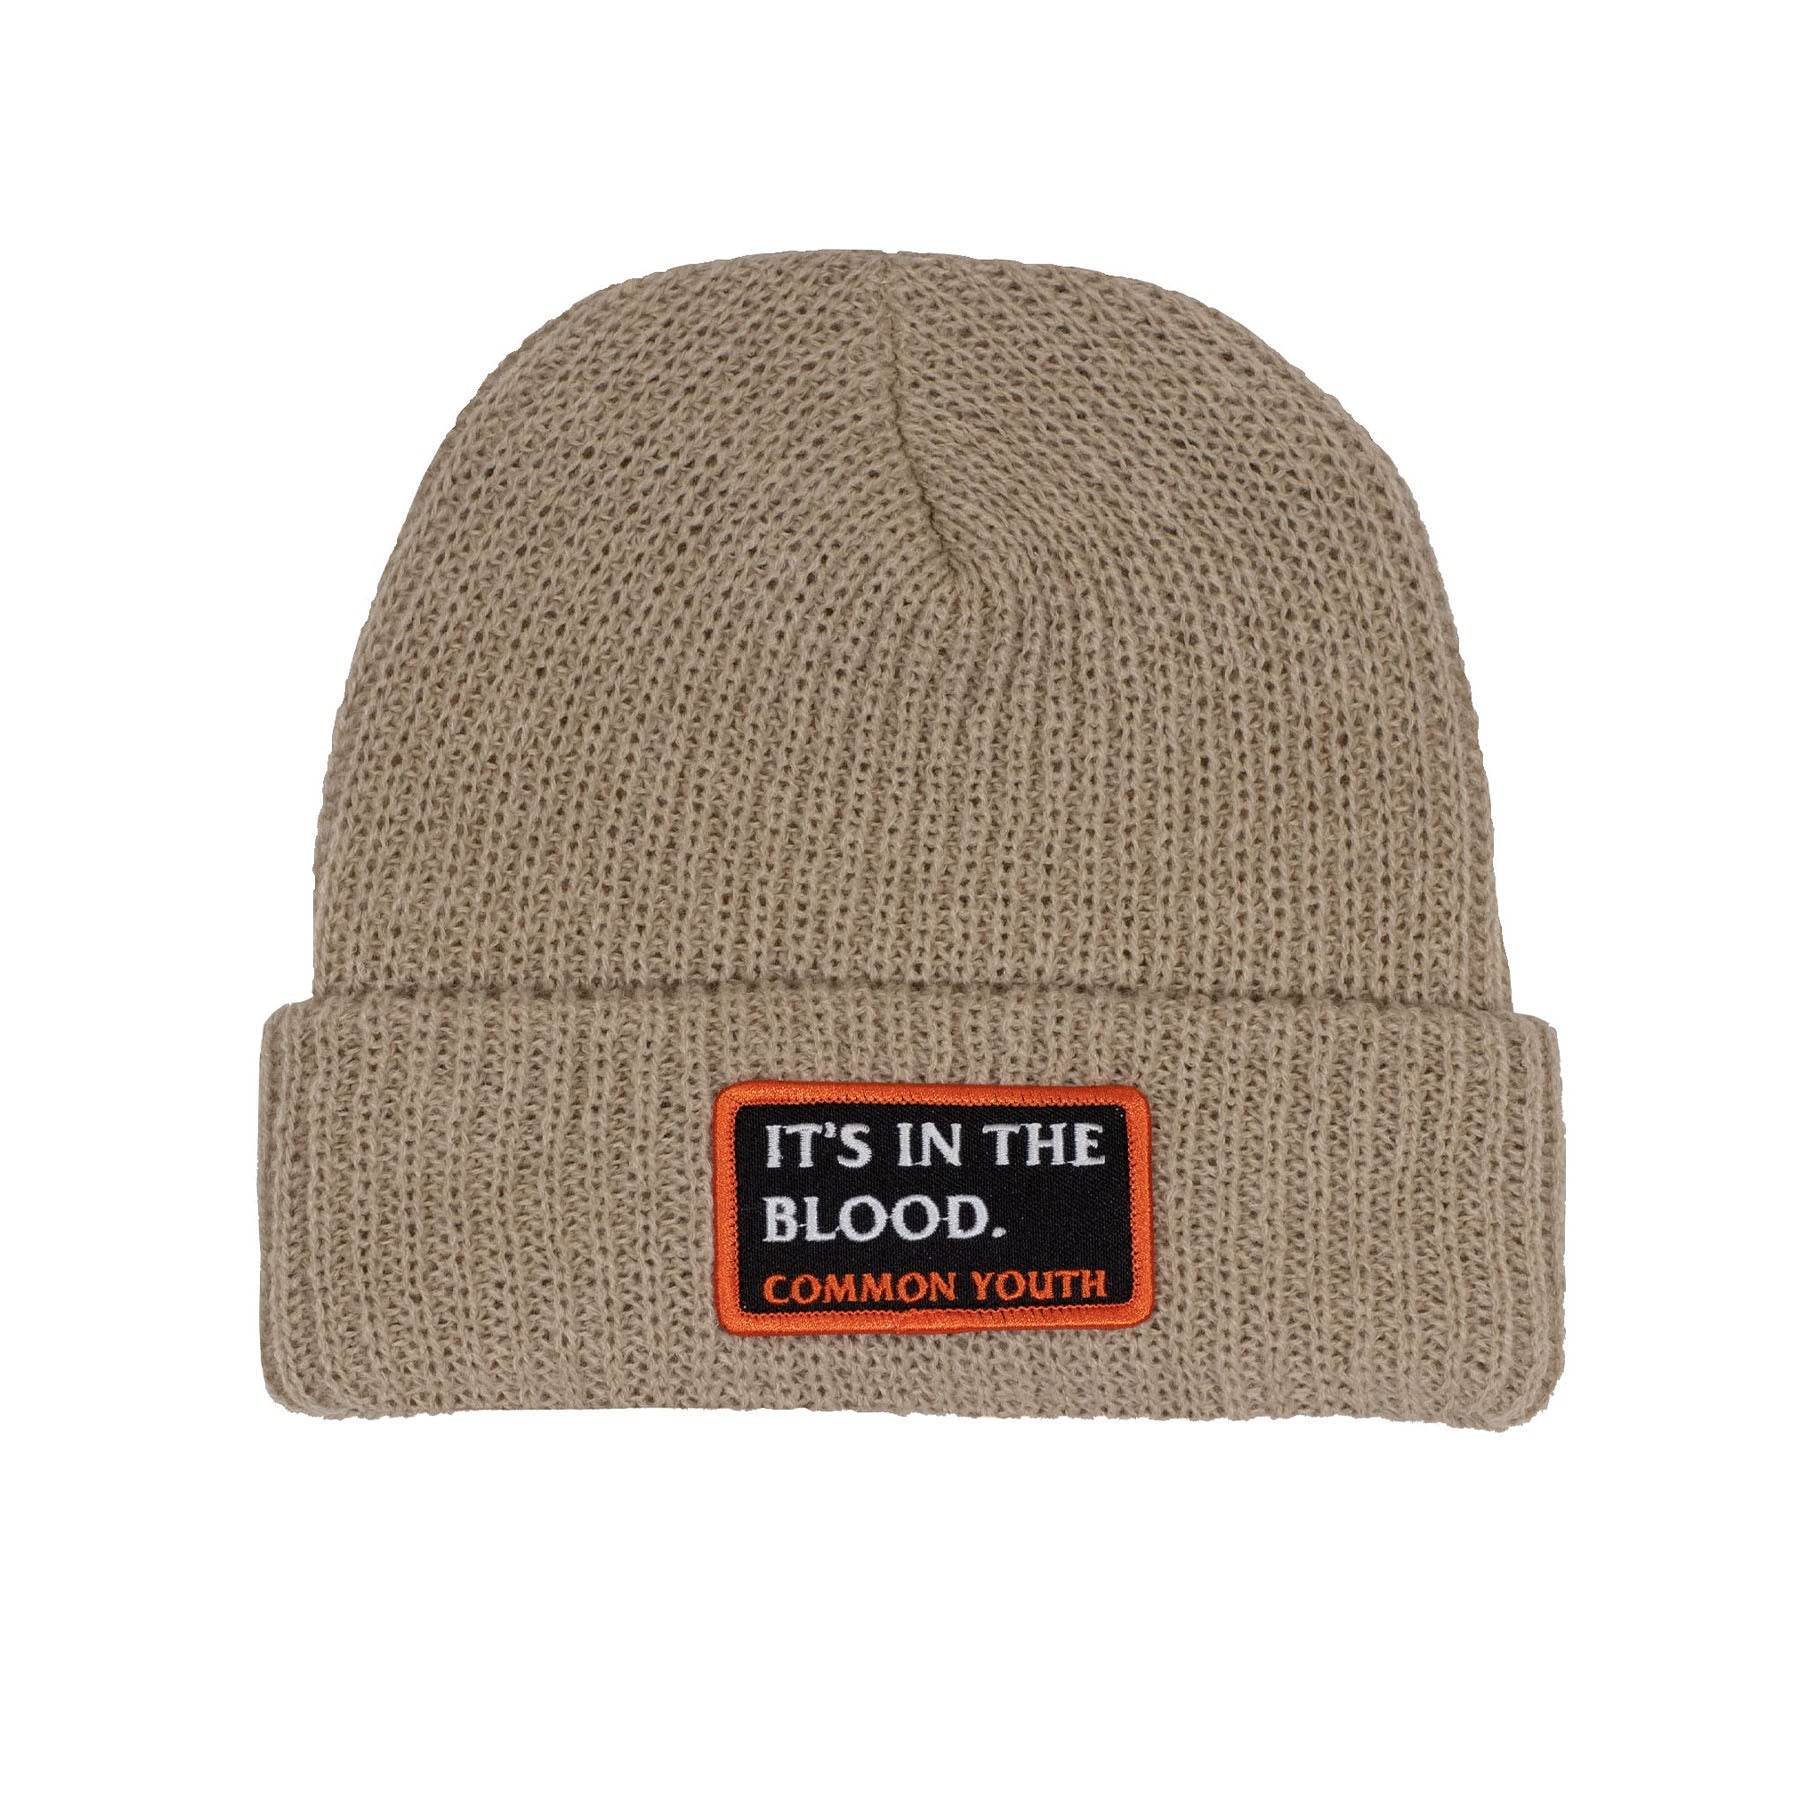 BLOOD PATCH BEANIE - commonyouthbrand